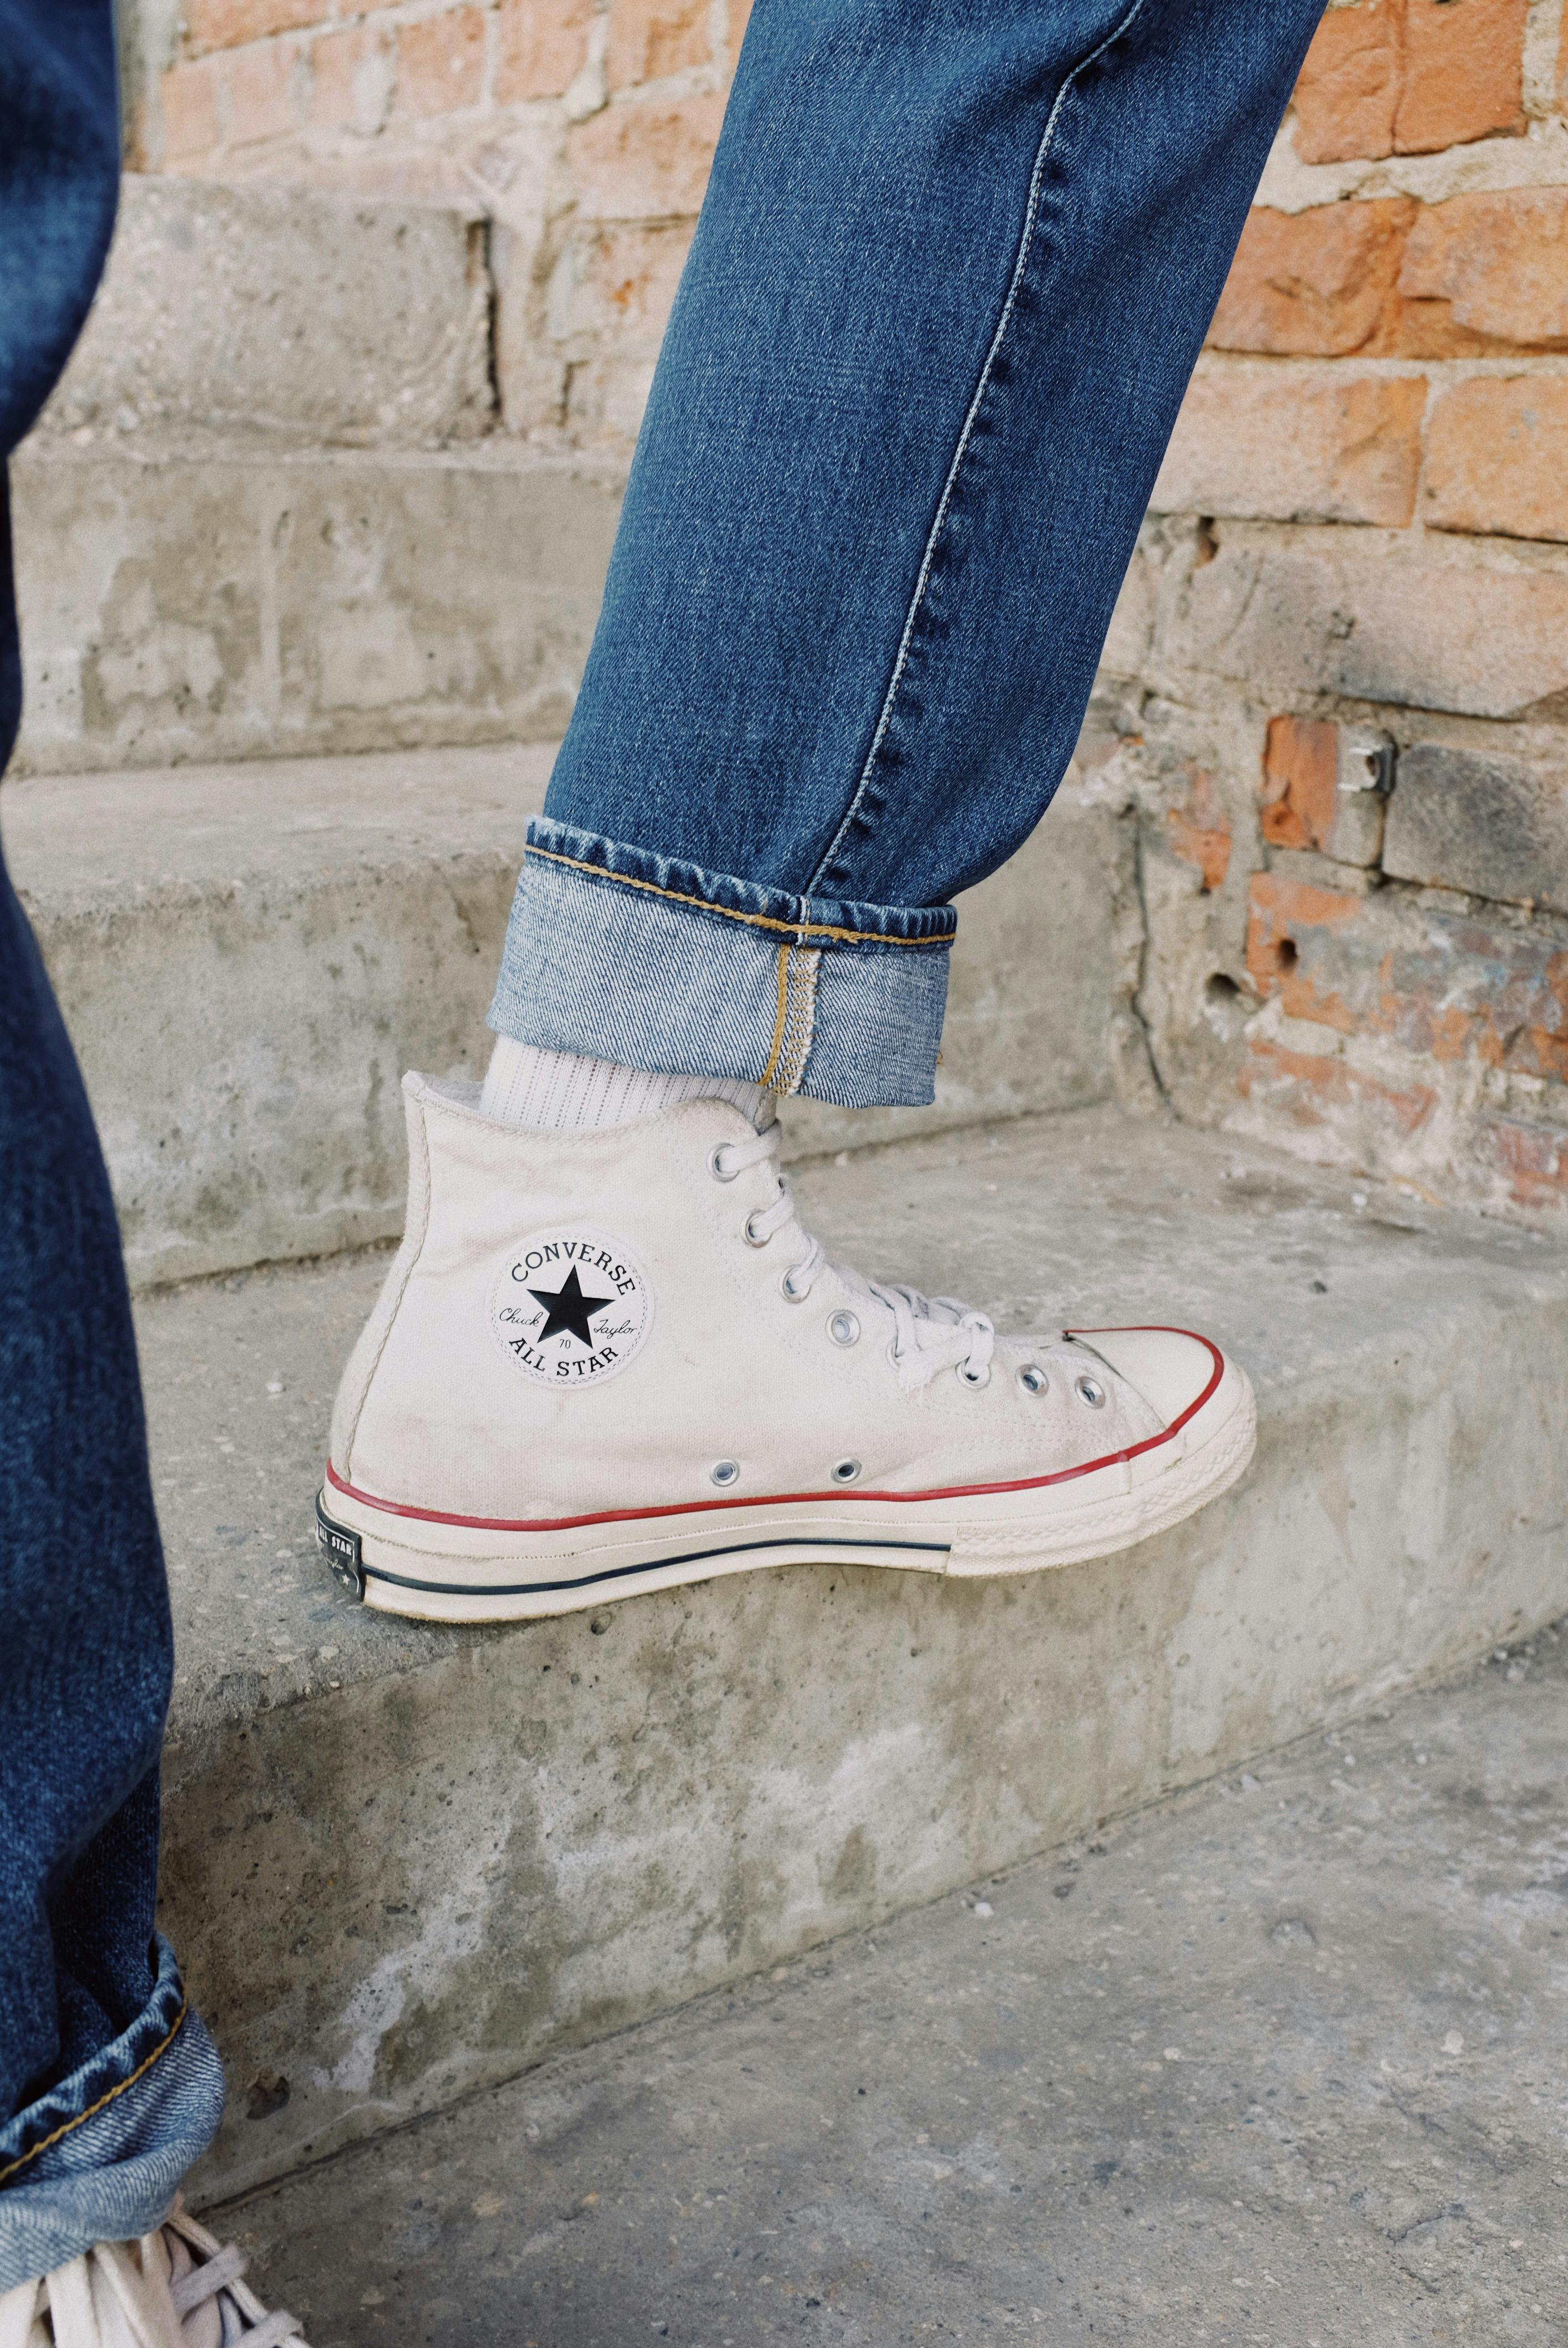 Person in Blue Denim Jeans Wearing White Converse All Star High Top  Sneakers · Free Stock Photo